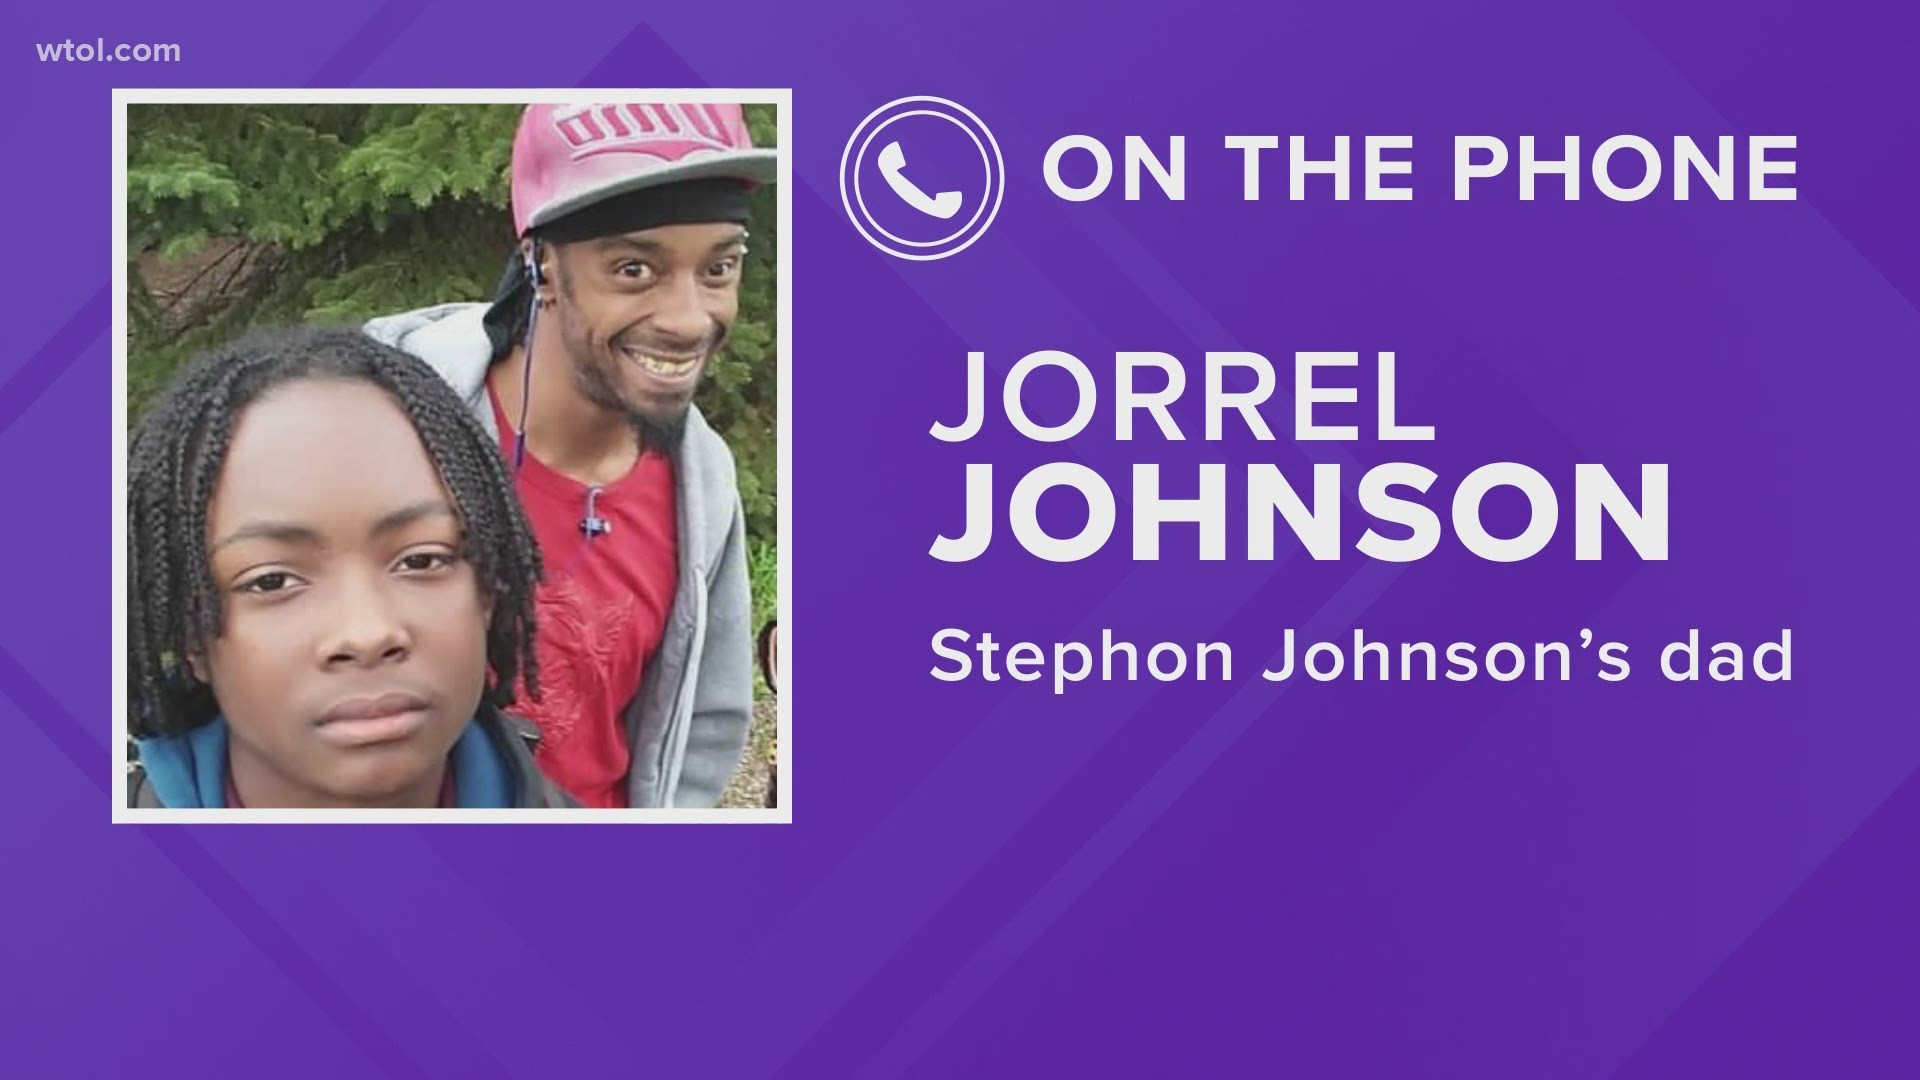 "He was my son and I don't mean as my child, I mean as the biggest star in my sky," said Stephon Johnson's father, Jorrel Johnson.